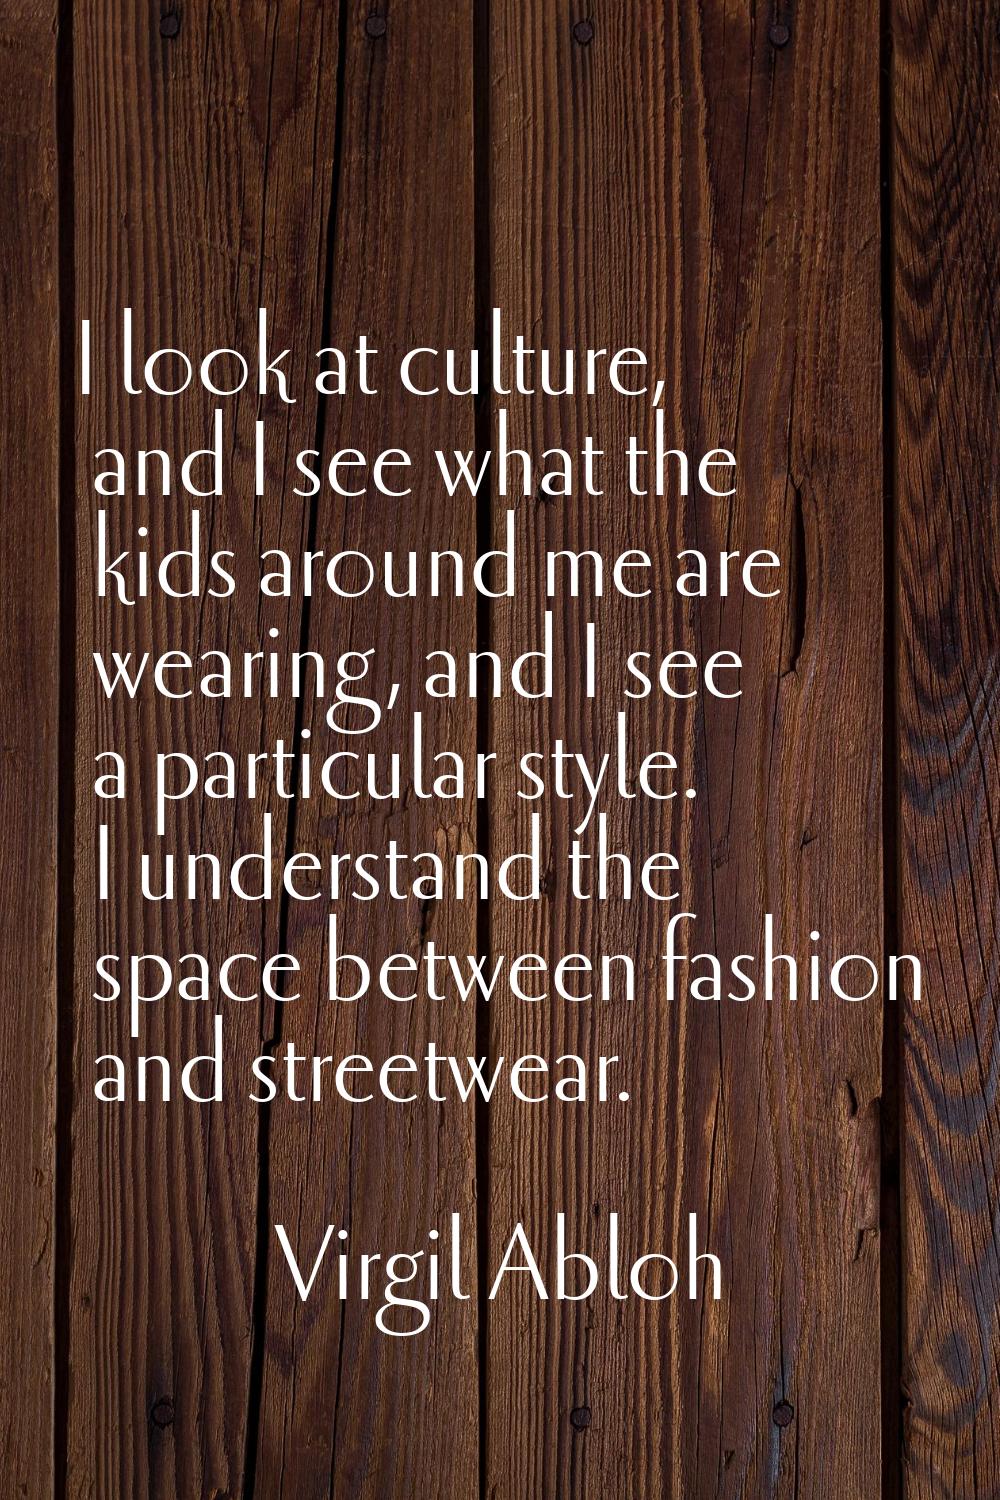 I look at culture, and I see what the kids around me are wearing, and I see a particular style. I u